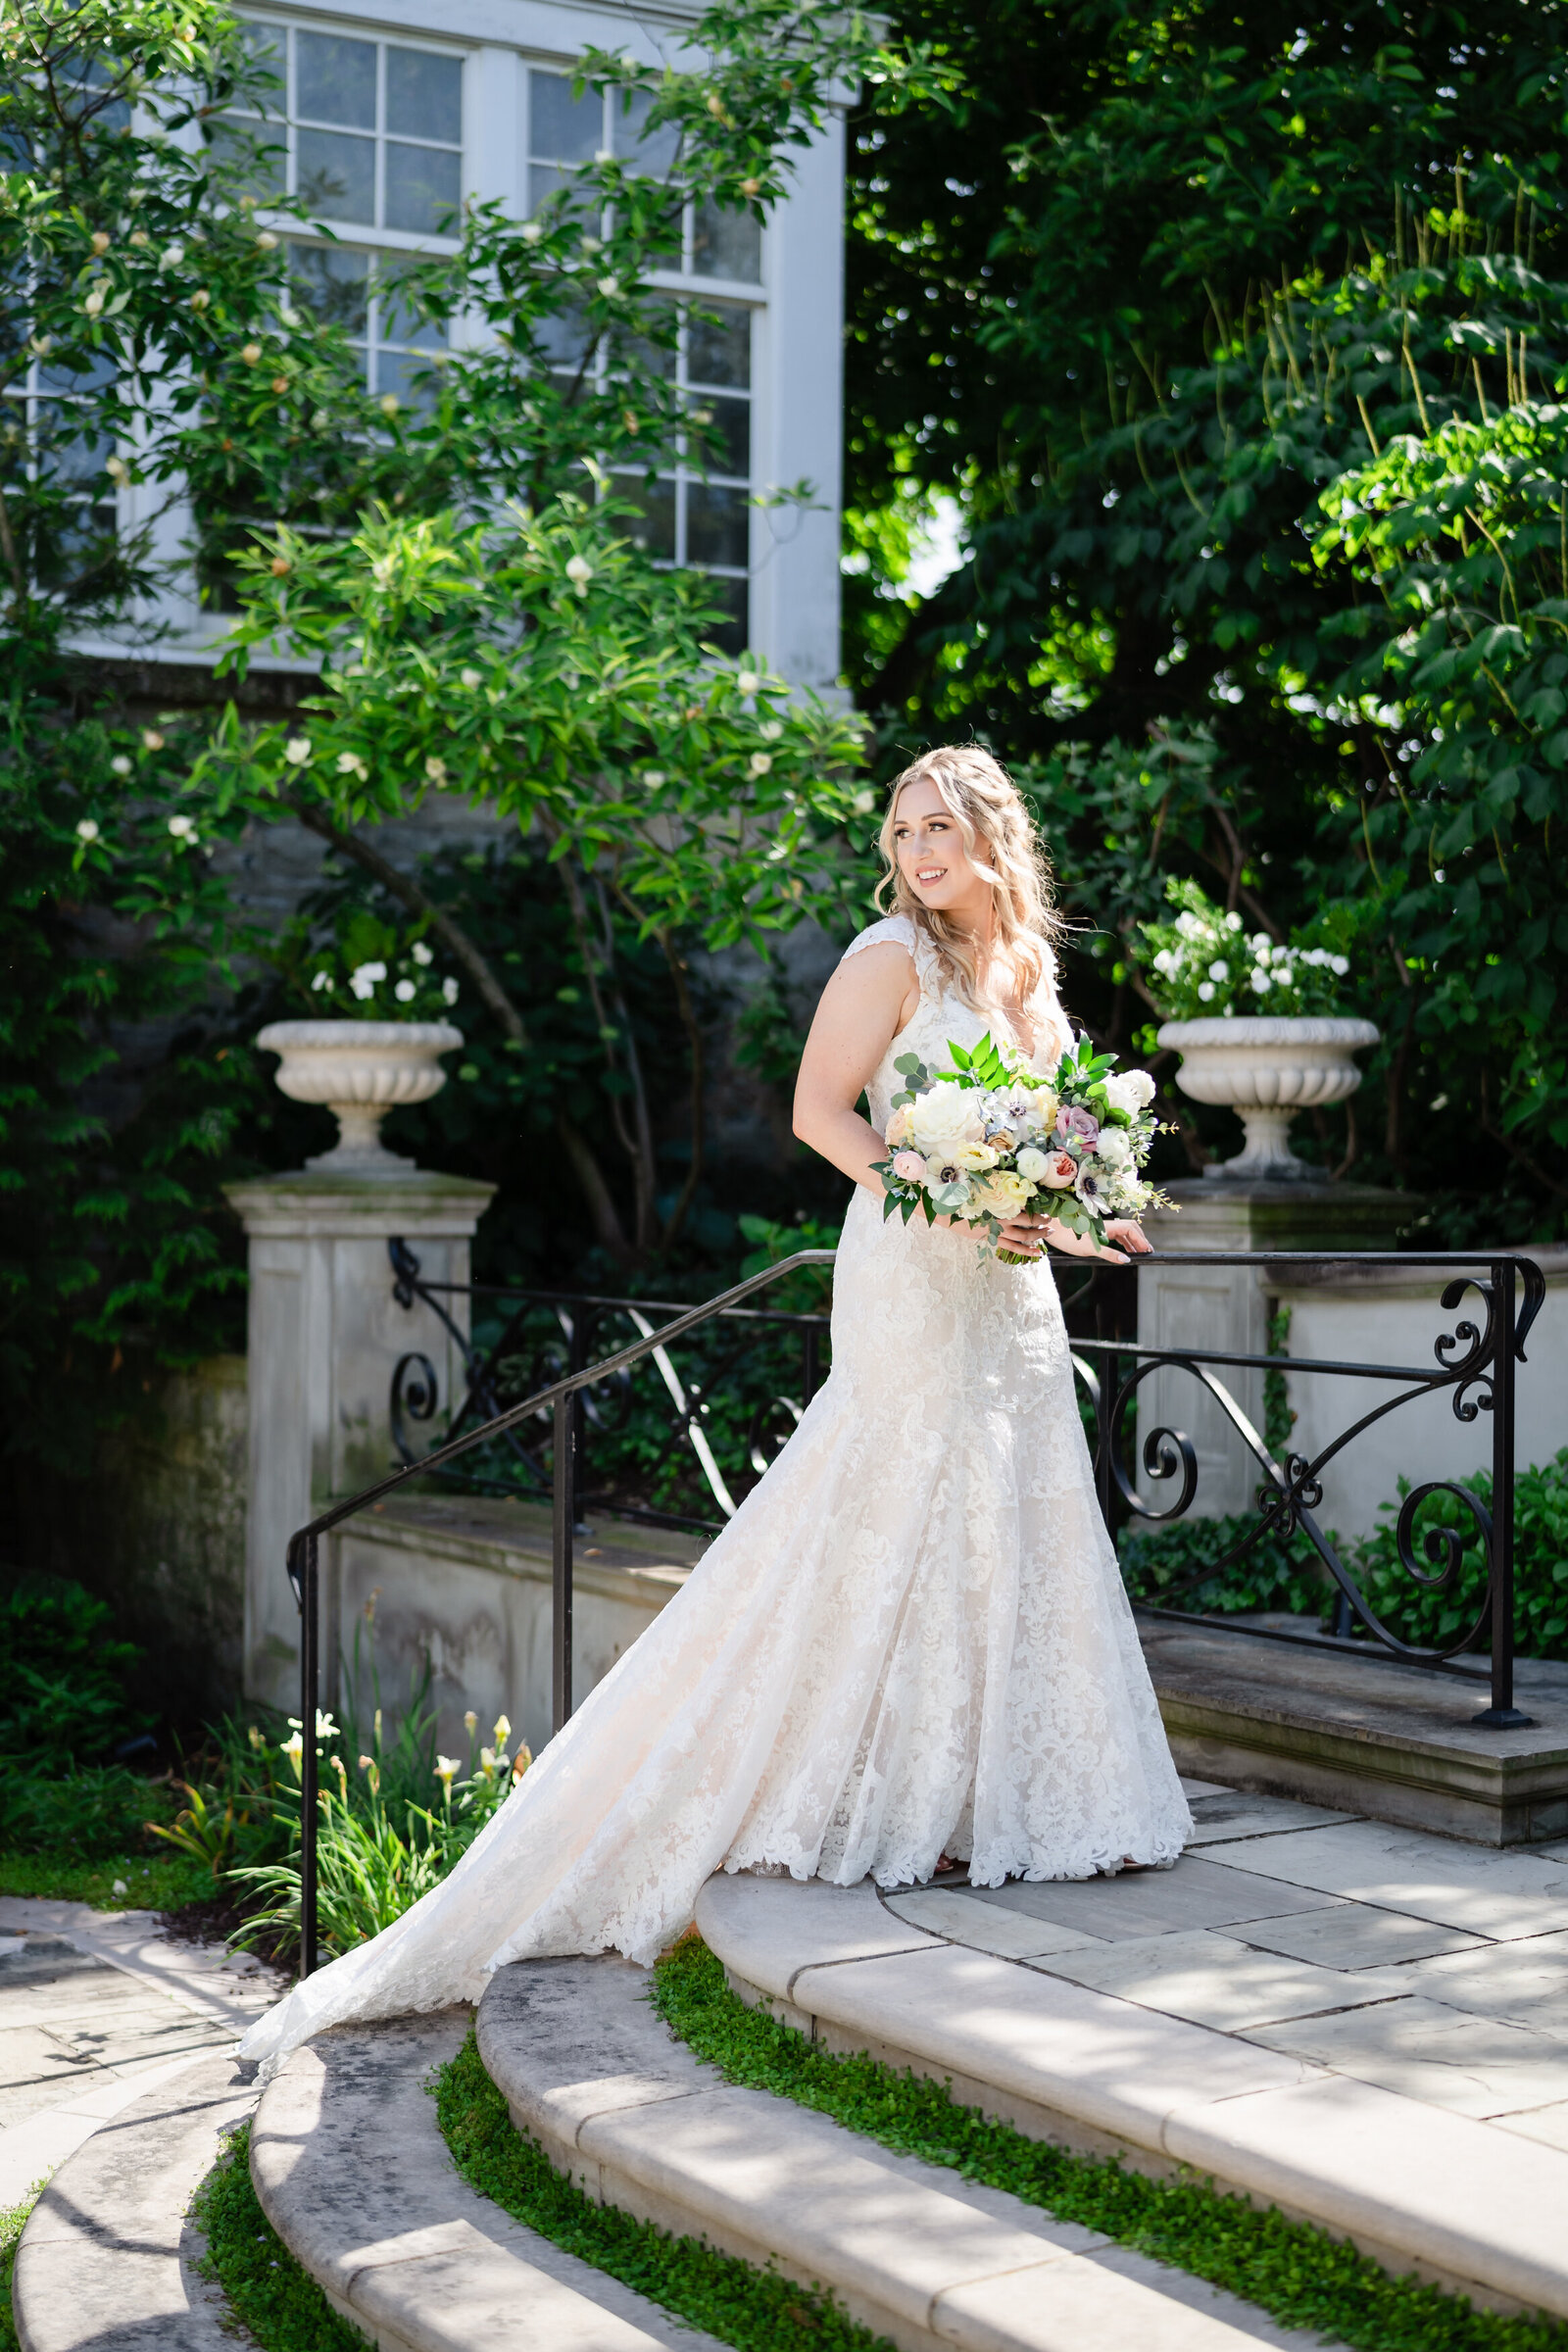 A bride walks up the steps and looks over her shoulder inside the Bride's Garden at the Franklin Park Conservatory